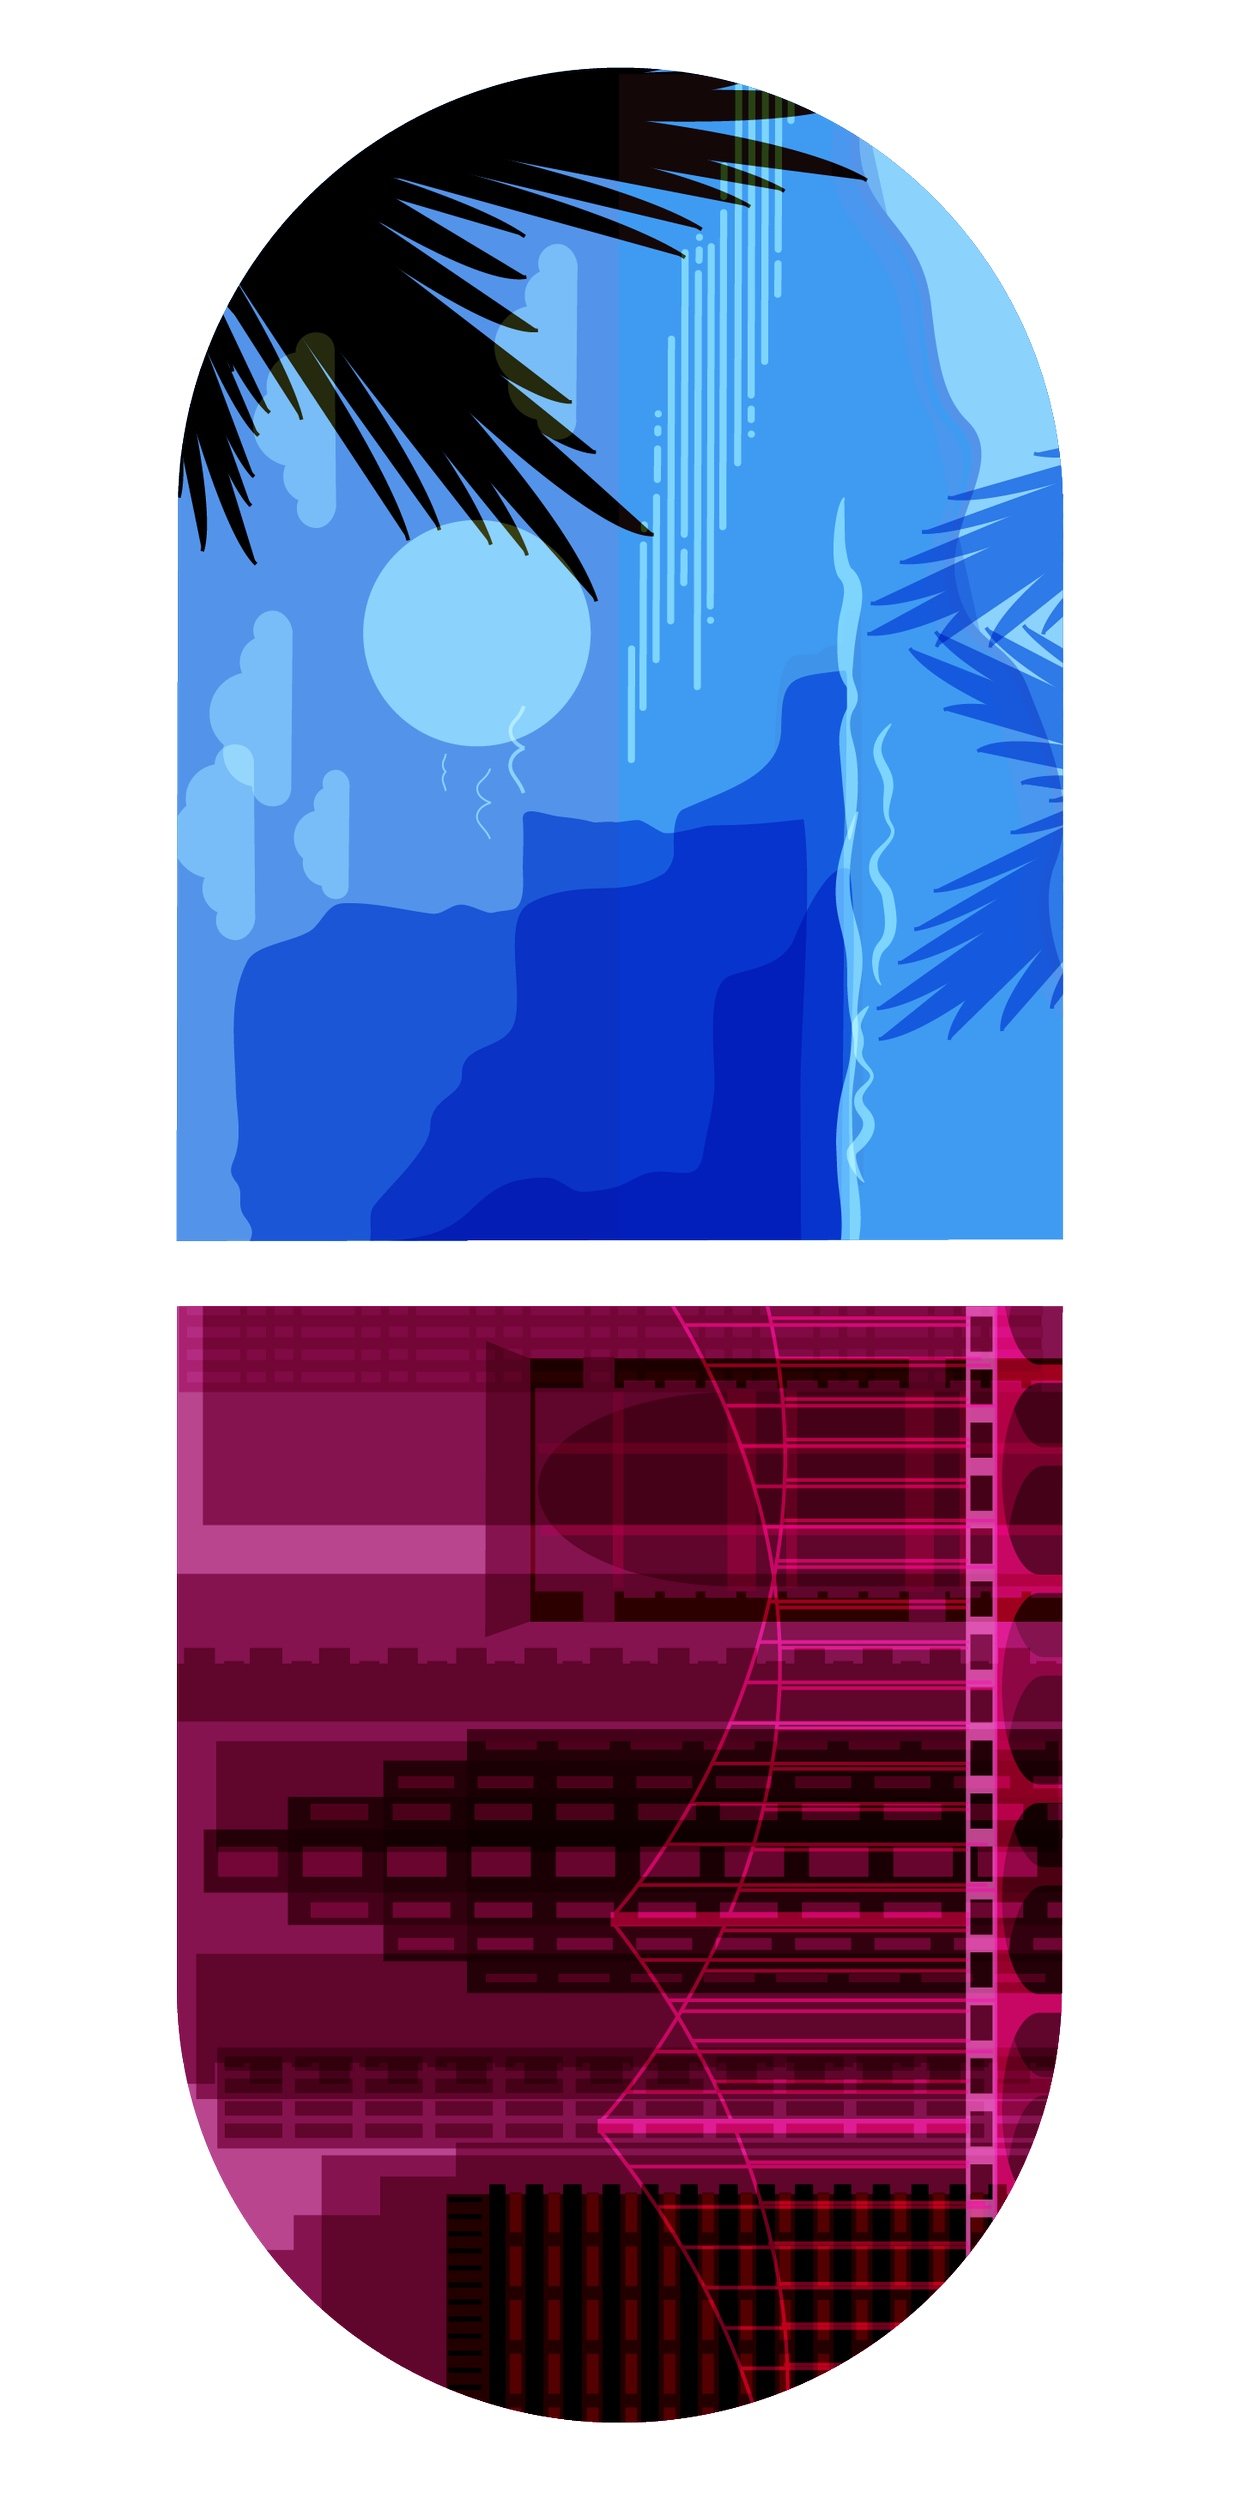 Capsules+-+Illustration+Pinkblue+*clear+divide*+PNG.jpg